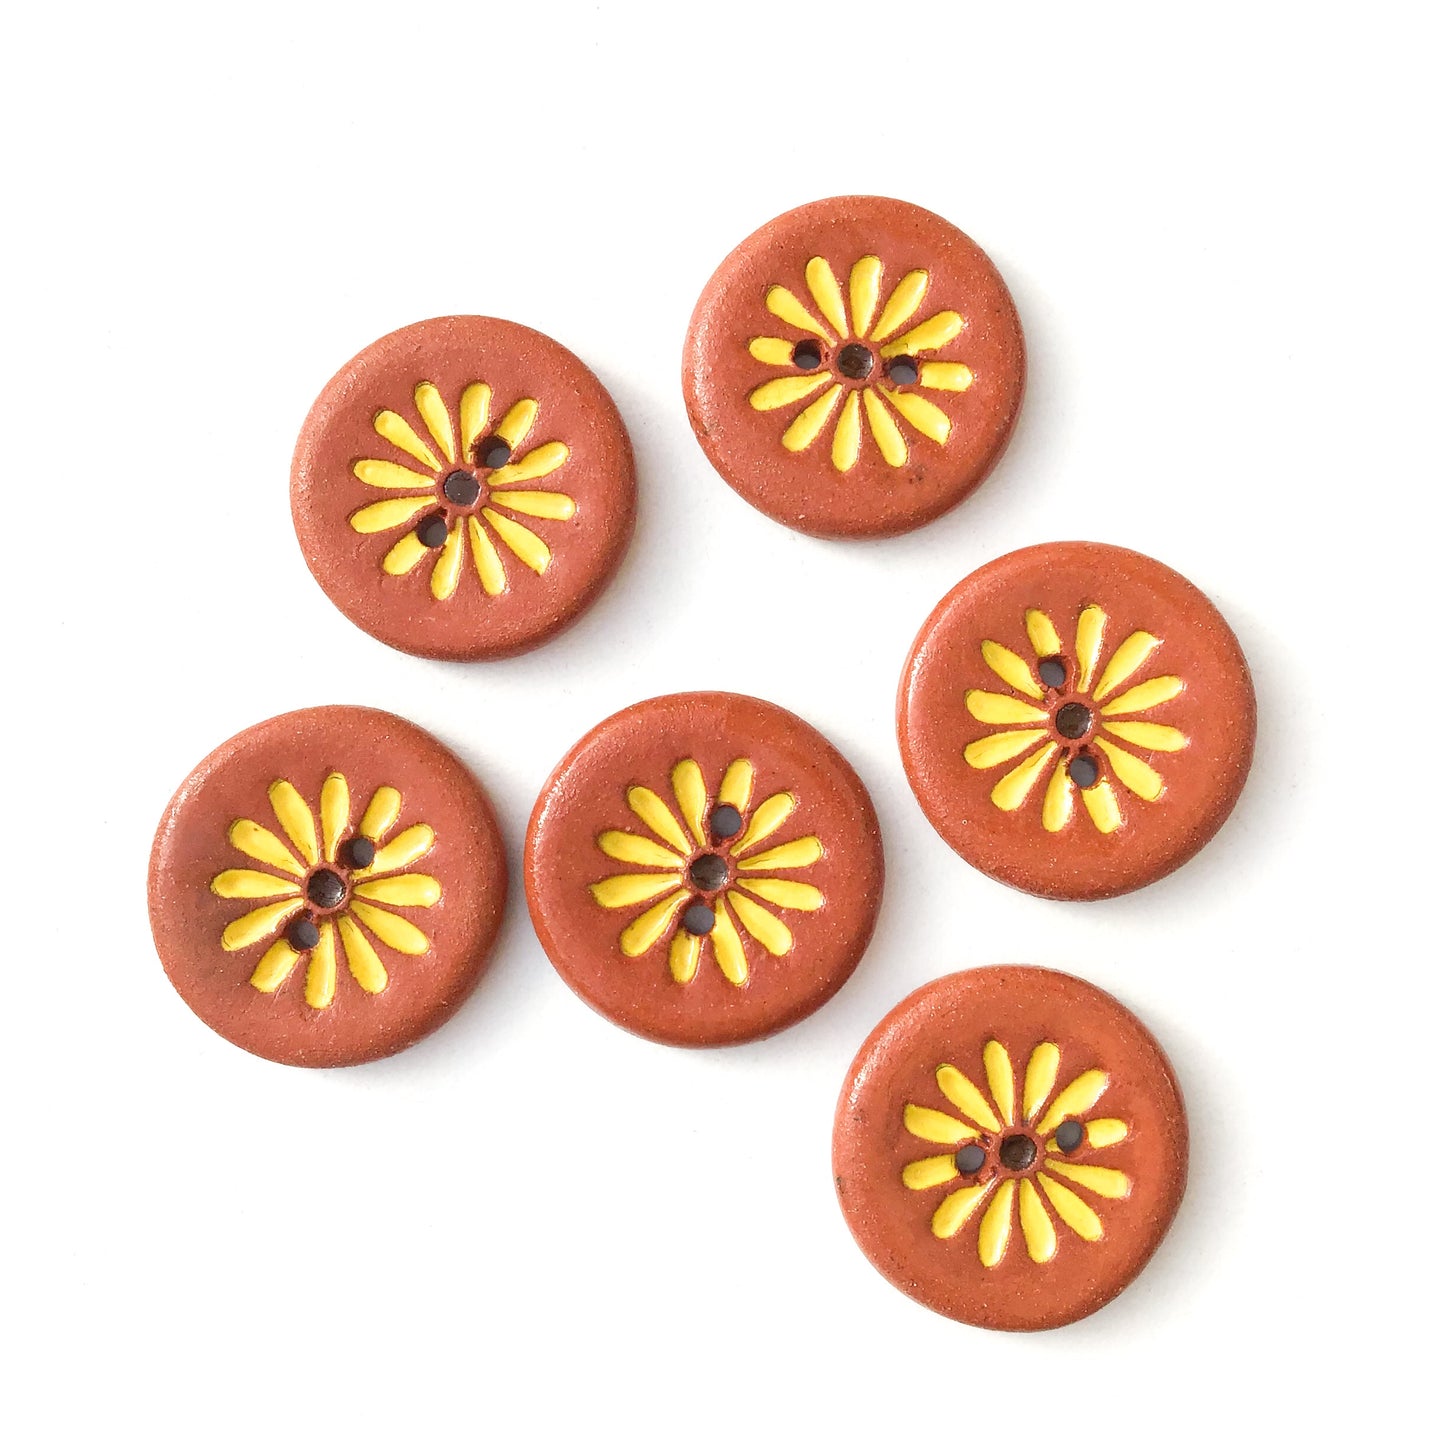 Yellow Daisy Buttons on Red Clay - Ceramic Flower Buttons - 3/4" - 7 Pack (ws-283)